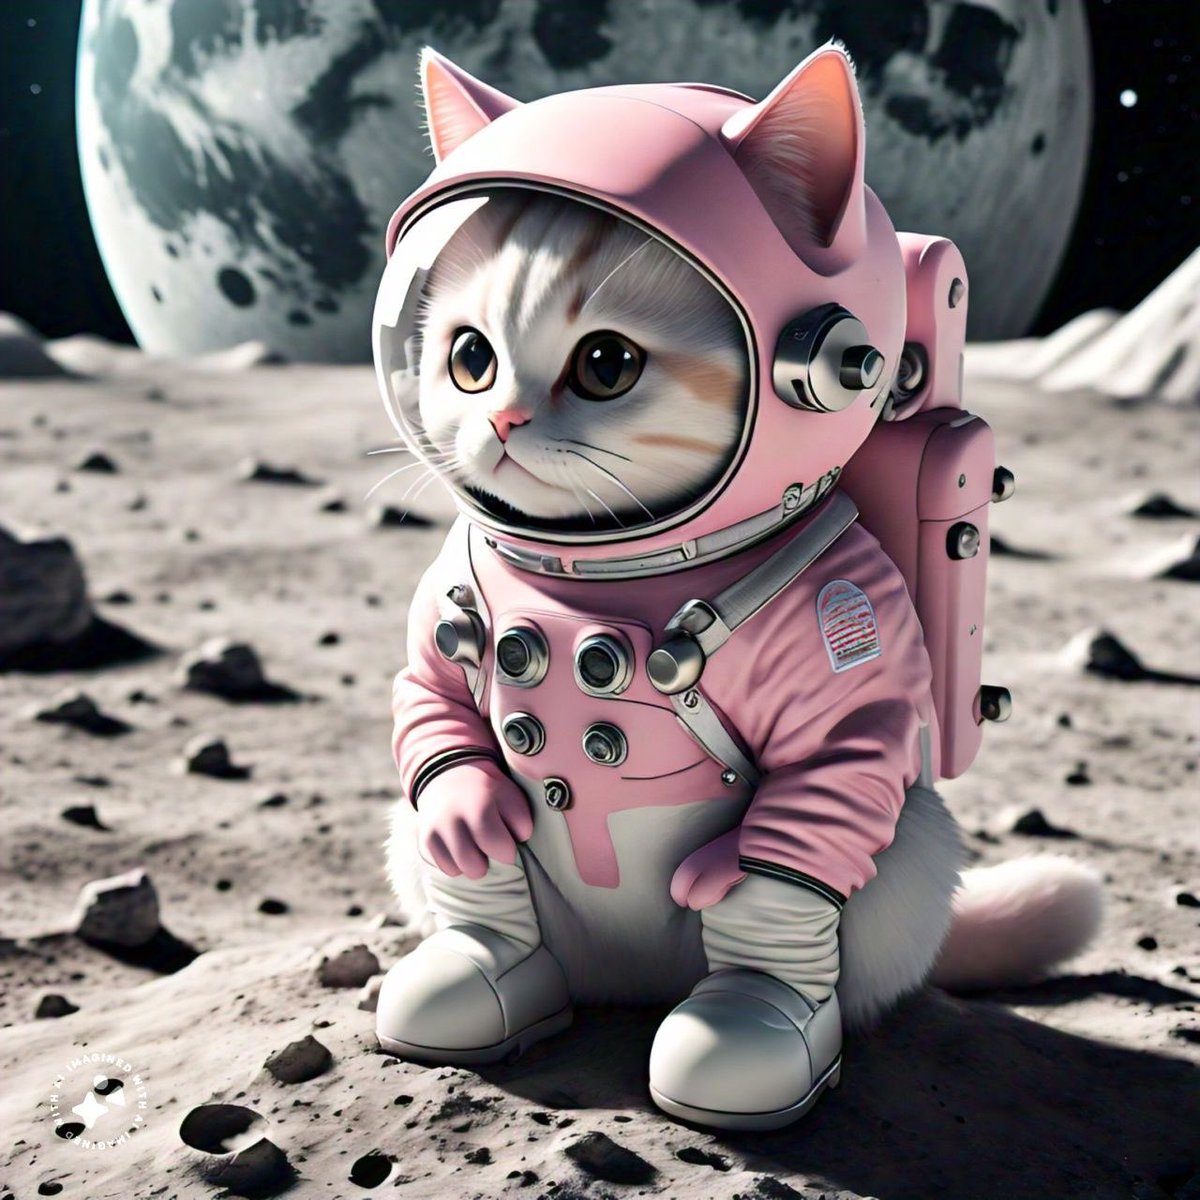 @cryptojourneyrs Just get  some $Kawaii
 and be  ready for this meme coin adventure! Let's ride the @KawaiiCat_Sol spirit to the moon 

4DLrdgAcSuEiBuC2Q5PozRPQjBvQTZjzN8eCeghPt4Te